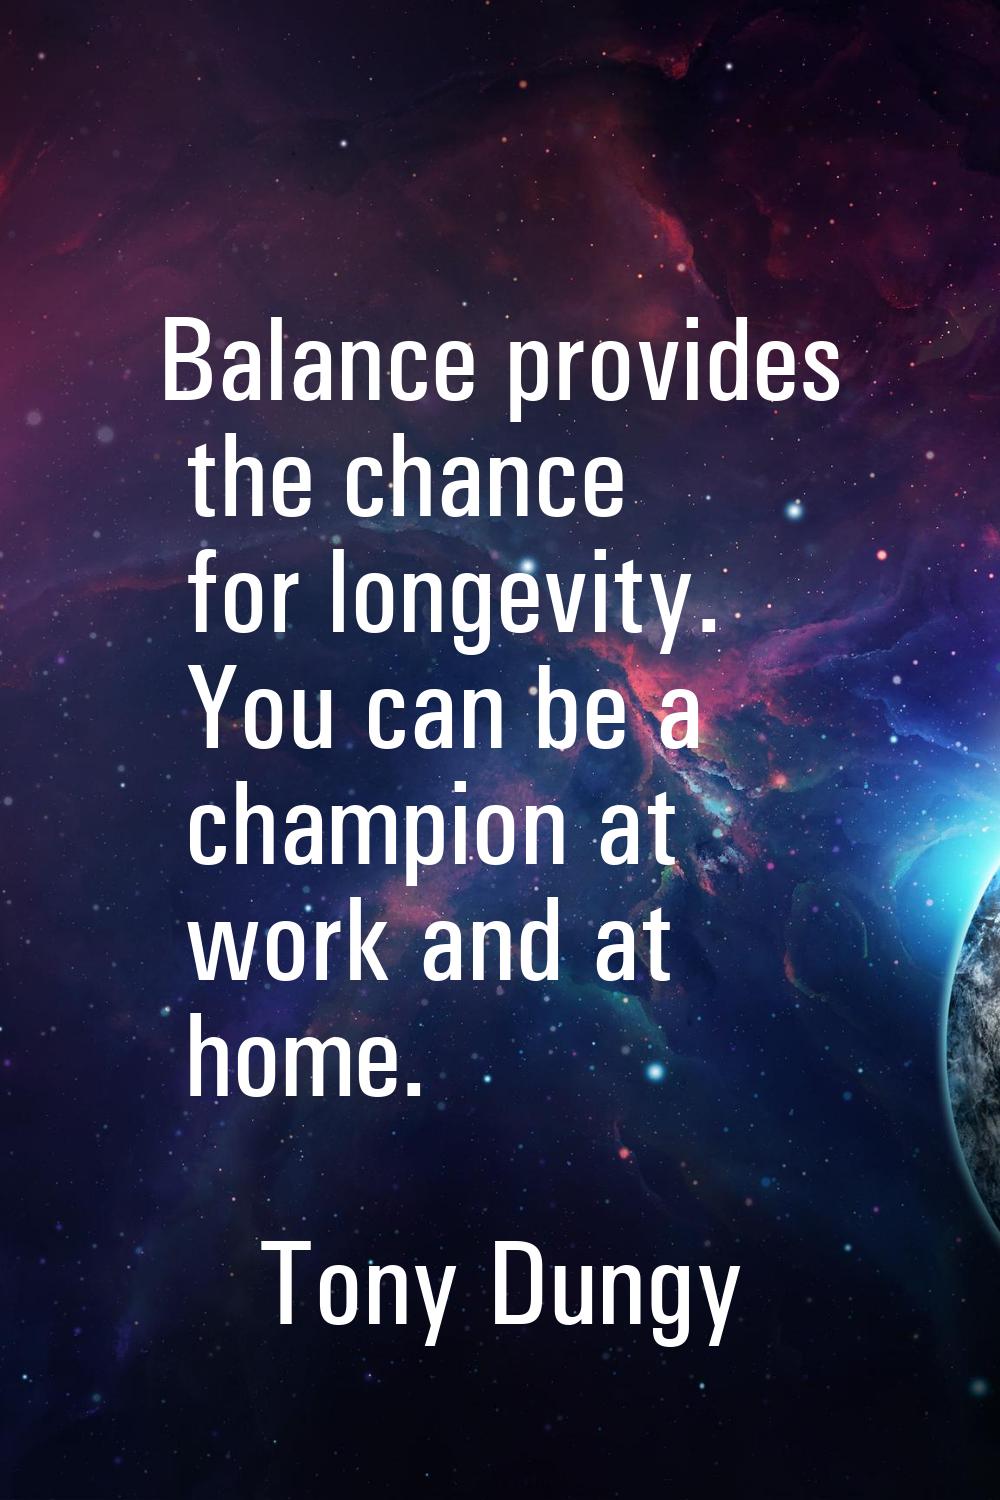 Balance provides the chance for longevity. You can be a champion at work and at home.